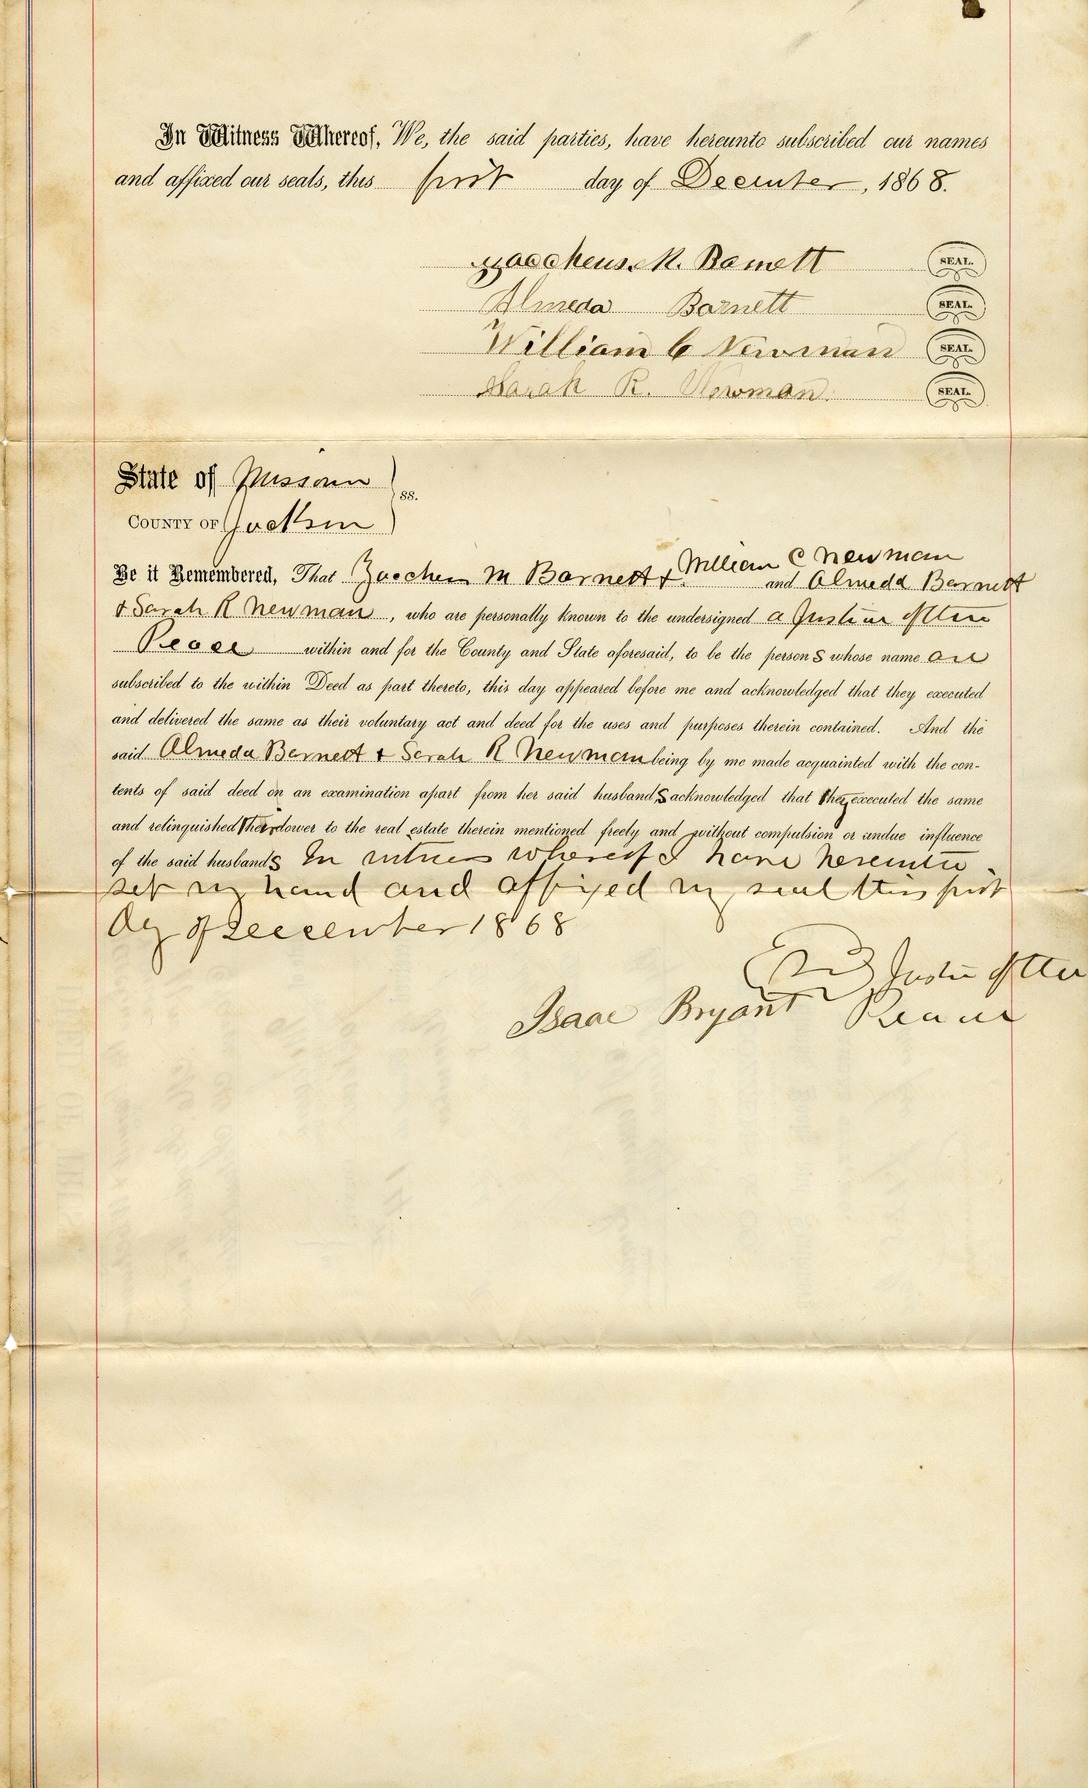 Deed of Trust from Jacchous M. Barnett and William C. Newman to William M. Dryden Jr.